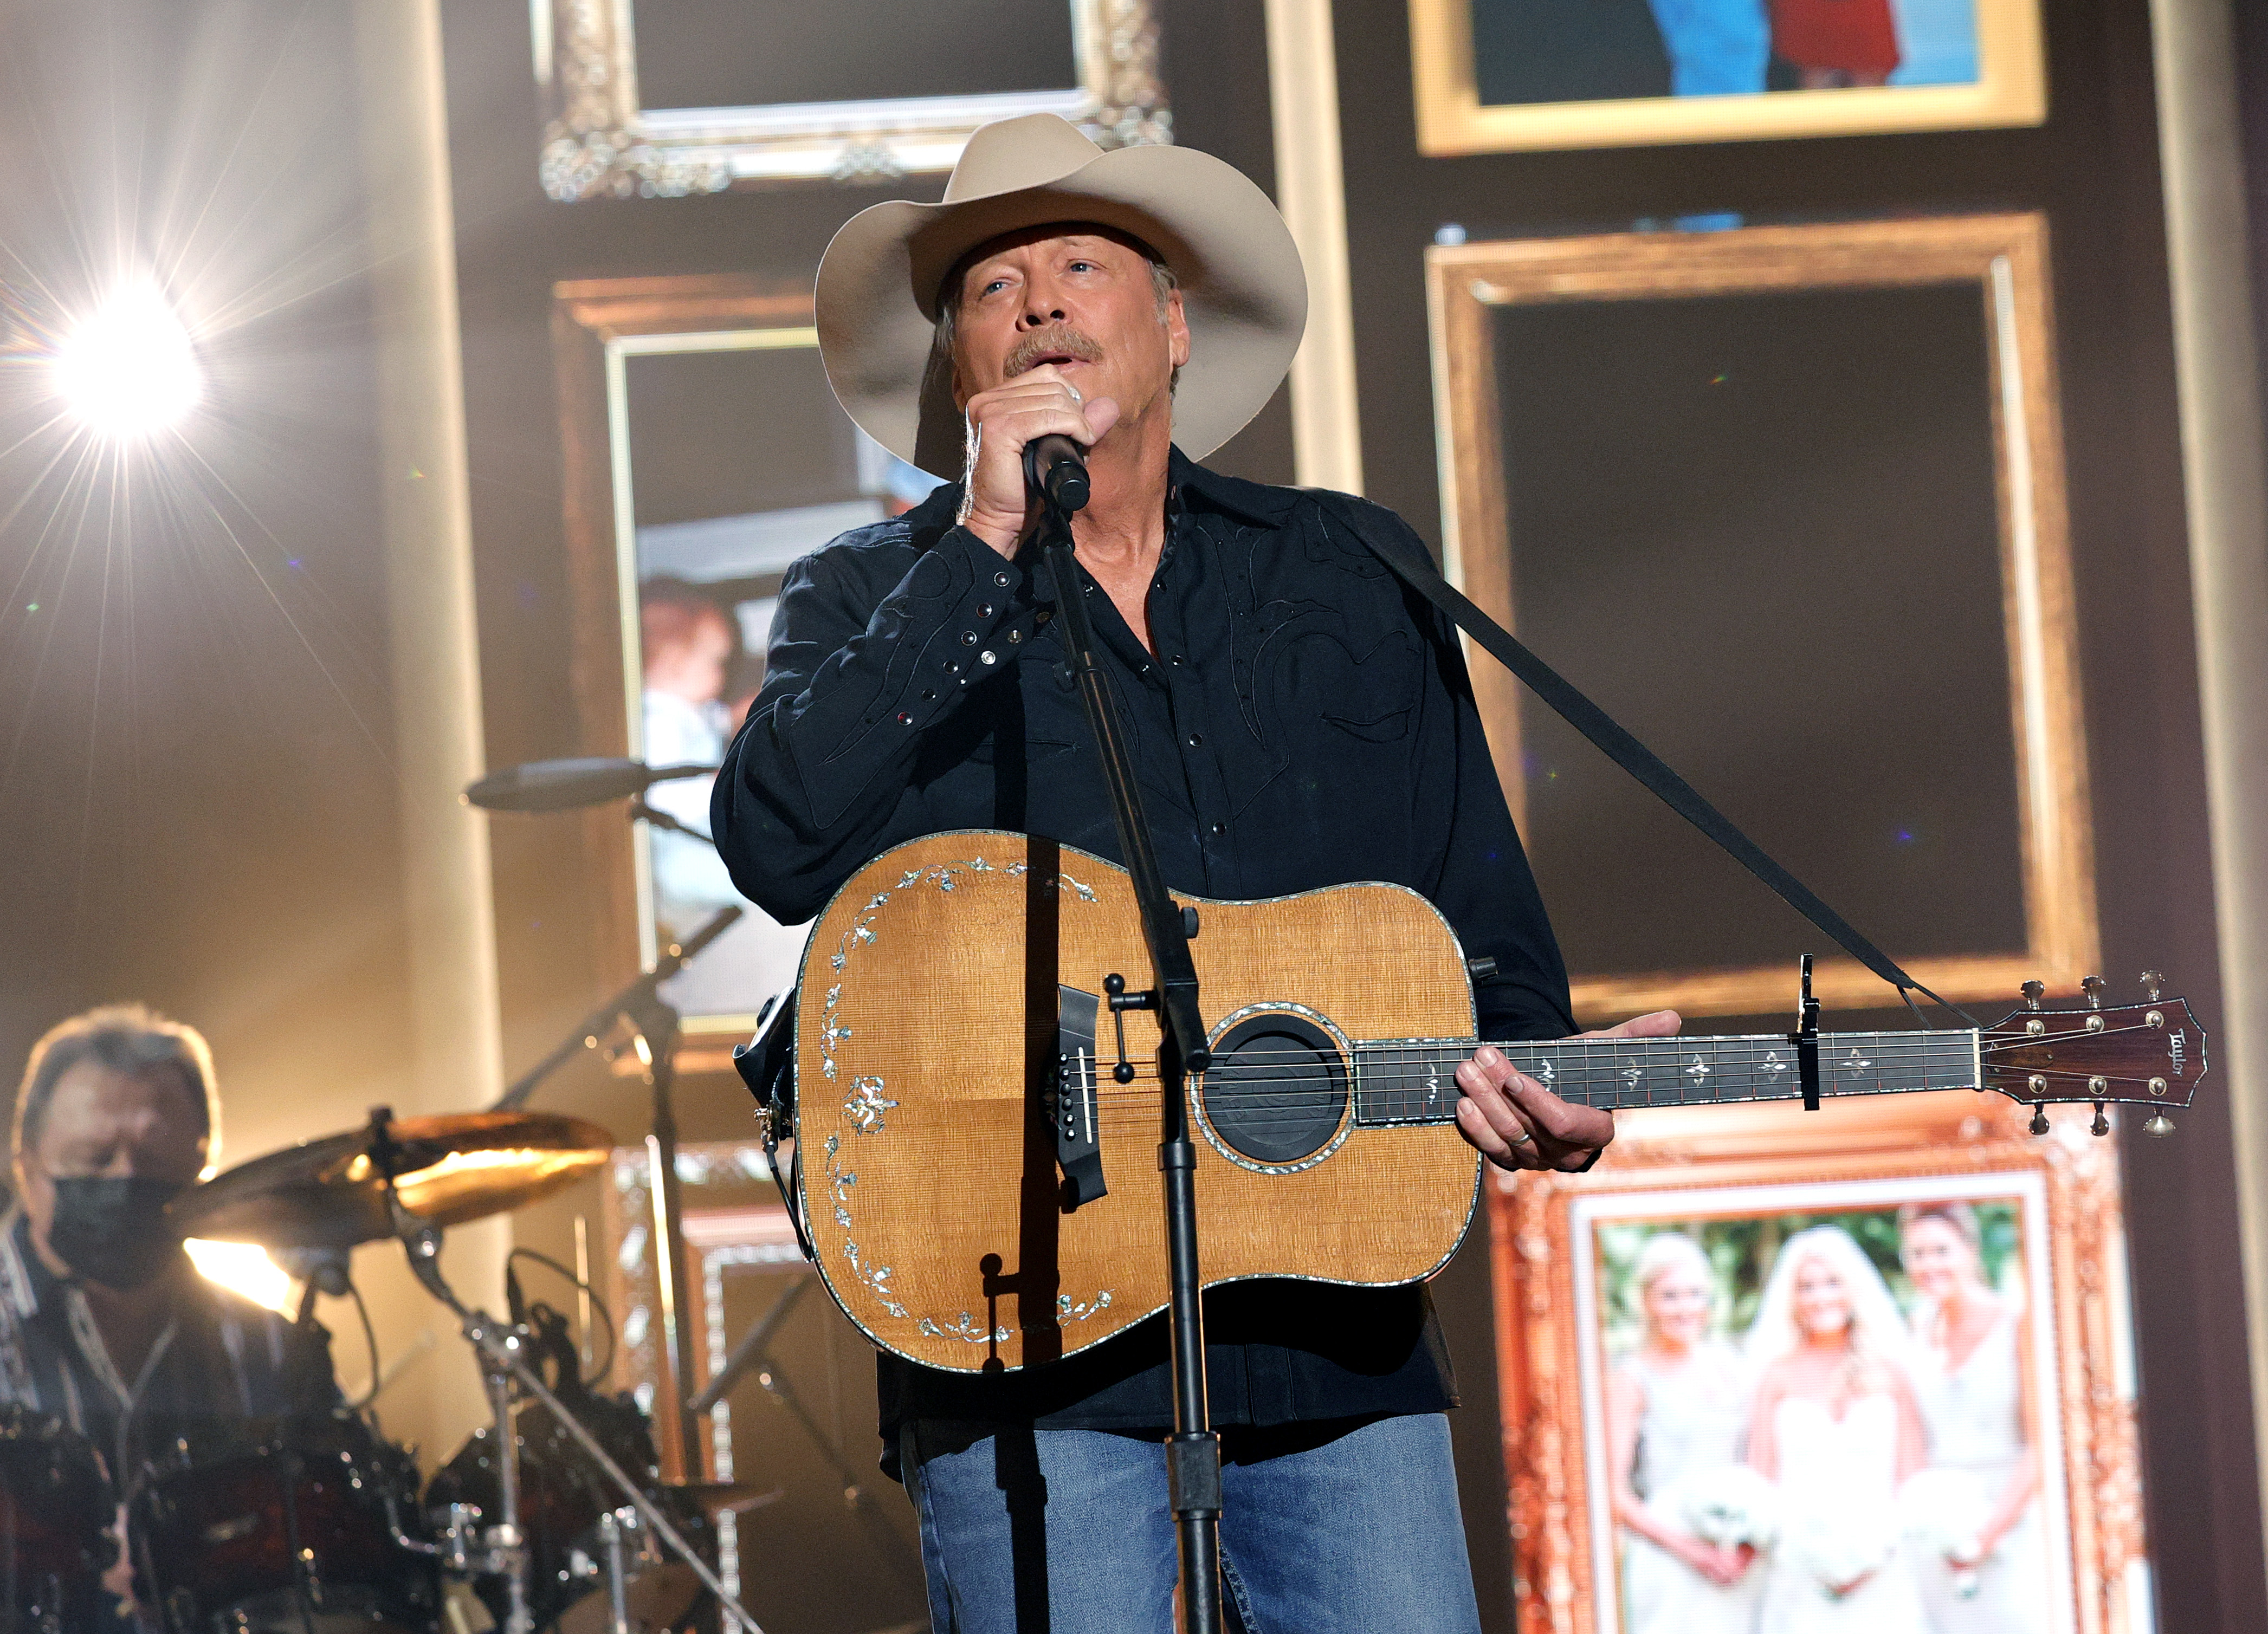 Alan Jackson performs at the 56th Academy of Country Music Awards on April 18, 2021 in Nashville, Tennessee | Source: Getty Images